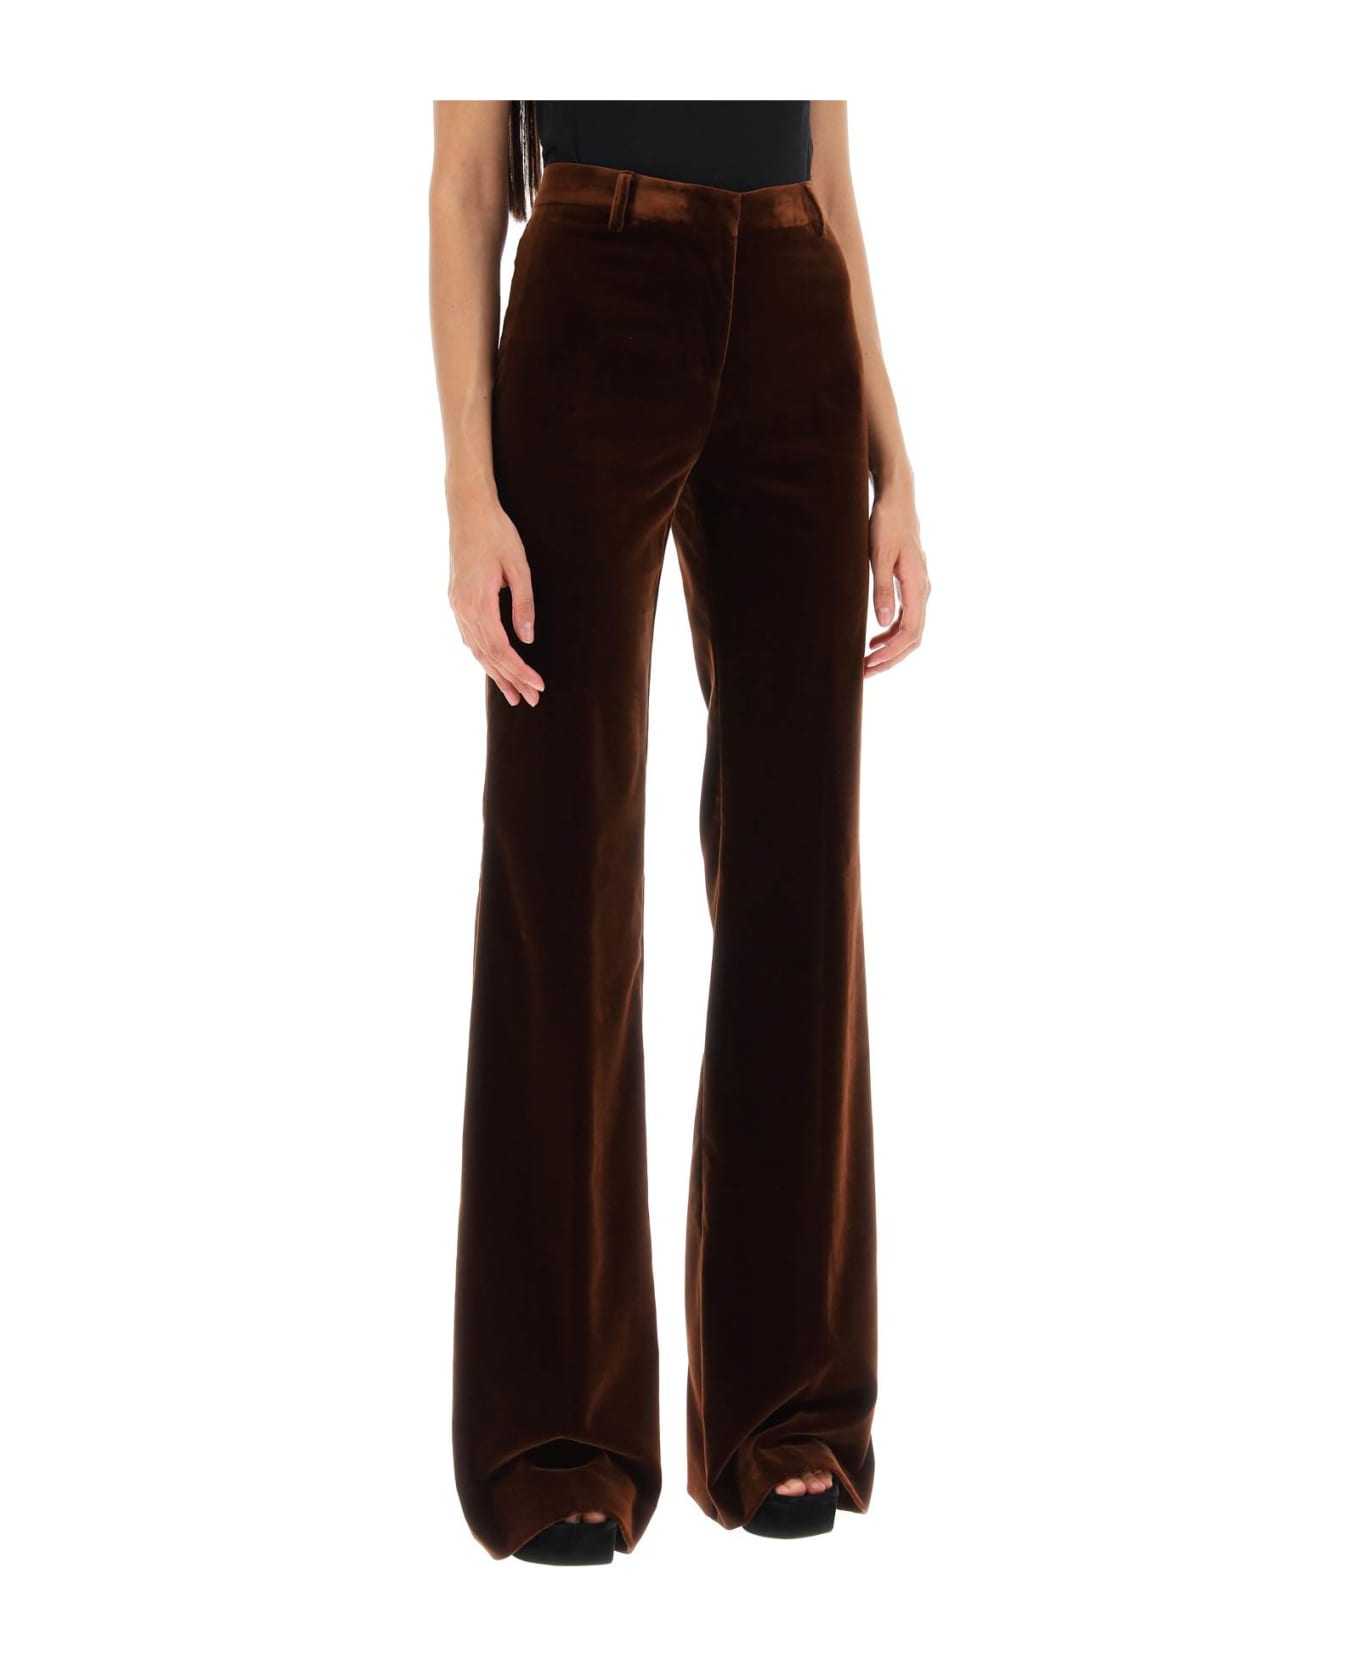 Etro Cotton Trousers - BROWN (Brown)